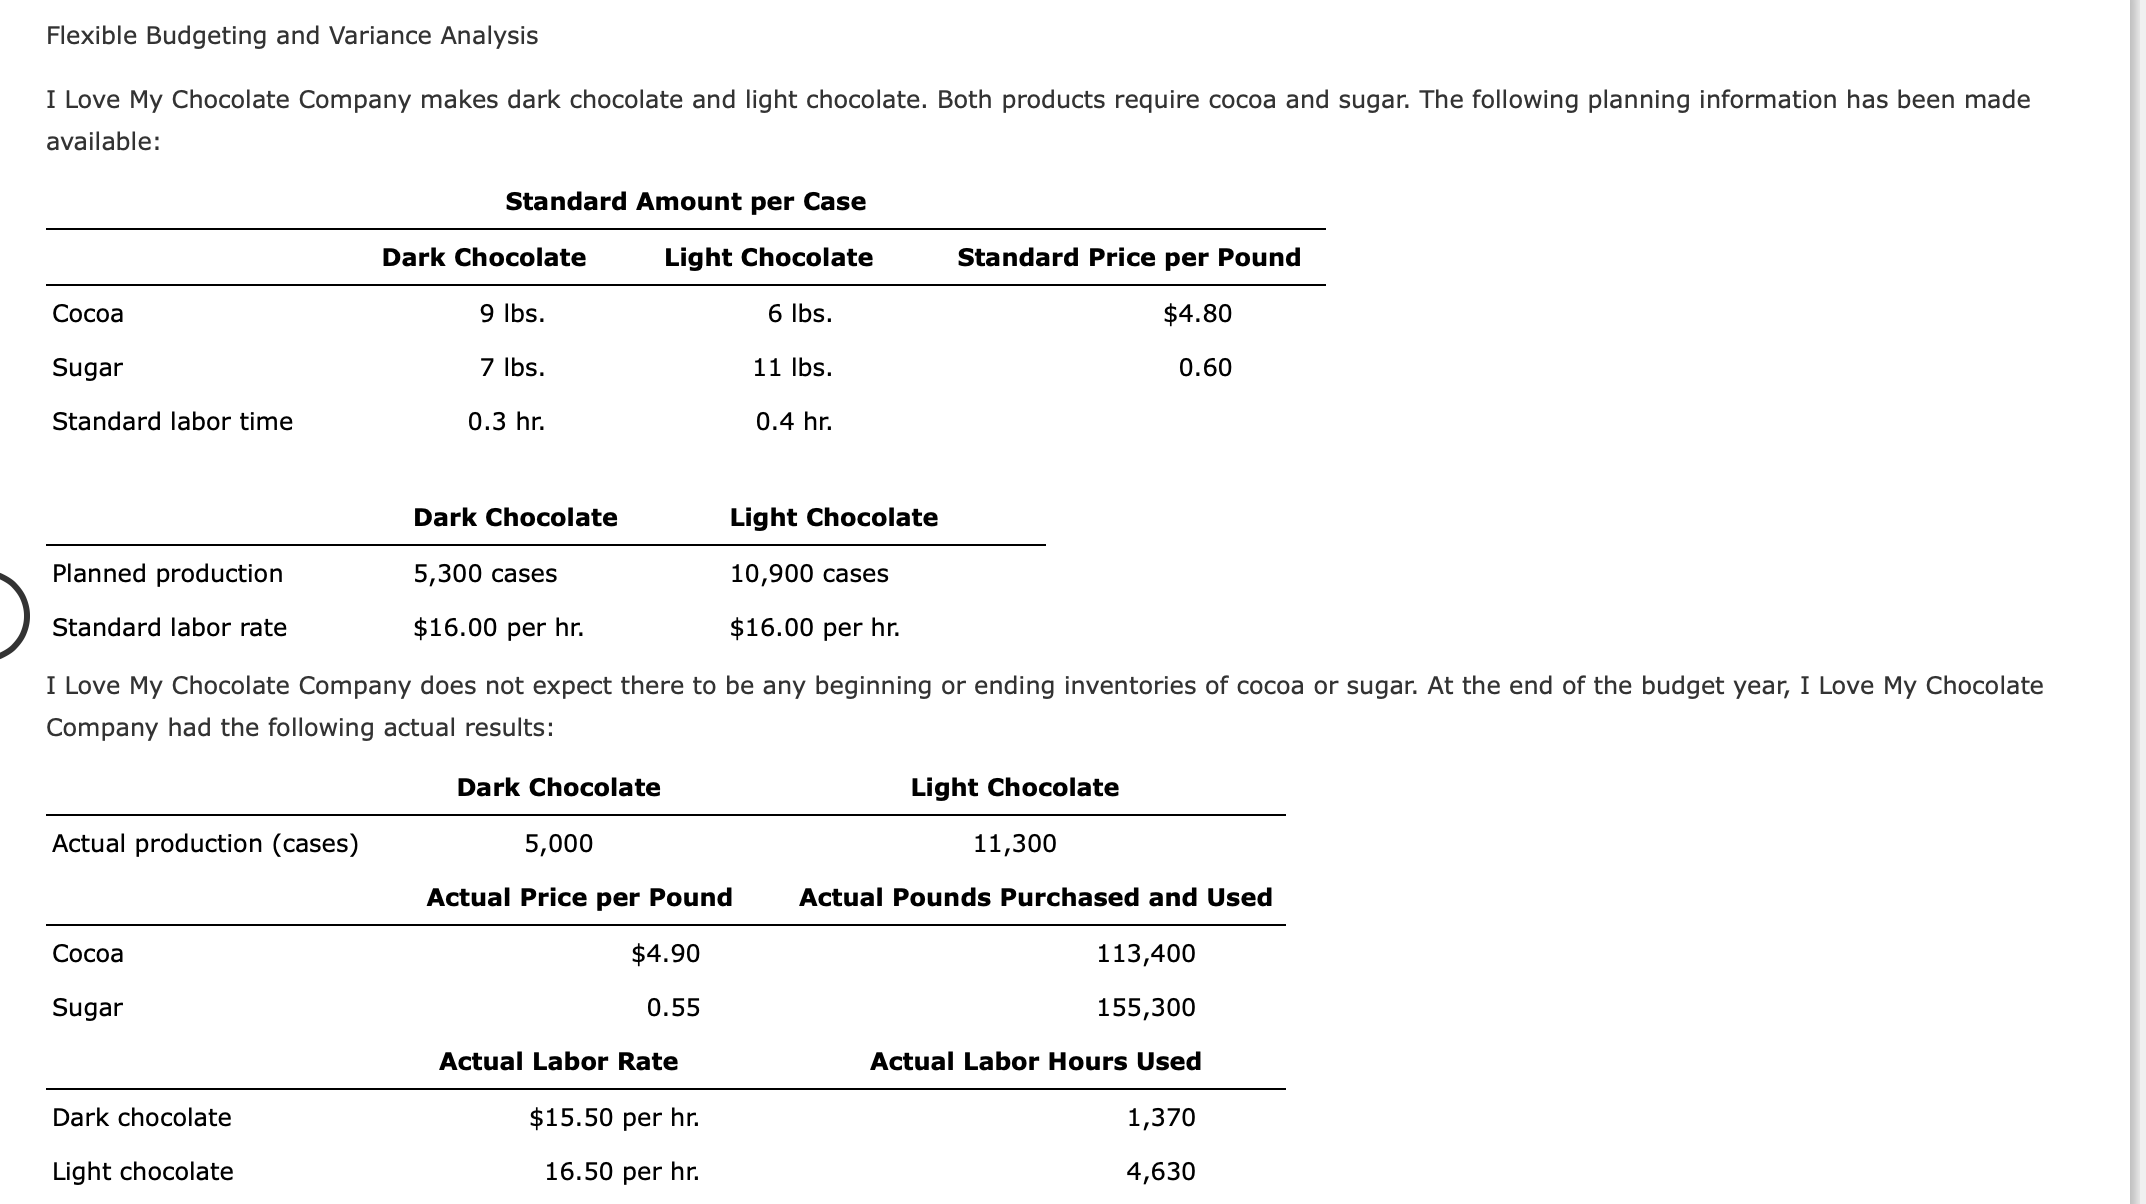 Flexible Budgeting and Variance Analysis
I Love My Chocolate Company makes dark chocolate and light chocolate. Both products require cocoa and sugar. The following planning information has been made
available:
Standard Amount per Case
Dark Chocolate
Light Chocolate
Standard Price per Pound
Сосоа
9 Ibs.
6 Ibs.
$4.80
Sugar
7 Ibs.
11 Ibs.
0.60
Standard labor time
0.3 hr.
0.4 hr.
Dark Chocolate
Light Chocolate
Planned production
5,300 cases
10,900 cases
Standard labor rate
$16.00 per hr.
$16.00 per hr.
I Love My Chocolate Company does not expect there to be any beginning or ending inventories of cocoa or sugar. At the end of the budget year, I Love My Chocolate
Company had the following actual results:
Dark Chocolate
Light Chocolate
Actual production (cases)
5,000
11,300
Actual Price per Pound
Actual Pounds Purchased and Used
Сосоа
$4.90
113,400
Sugar
0.55
155,300
Actual Labor Rate
Actual Labor Hours Used
Dark chocolate
$15.50 per hr.
1,370
Light chocolate
16.50 per hr.
4,630
